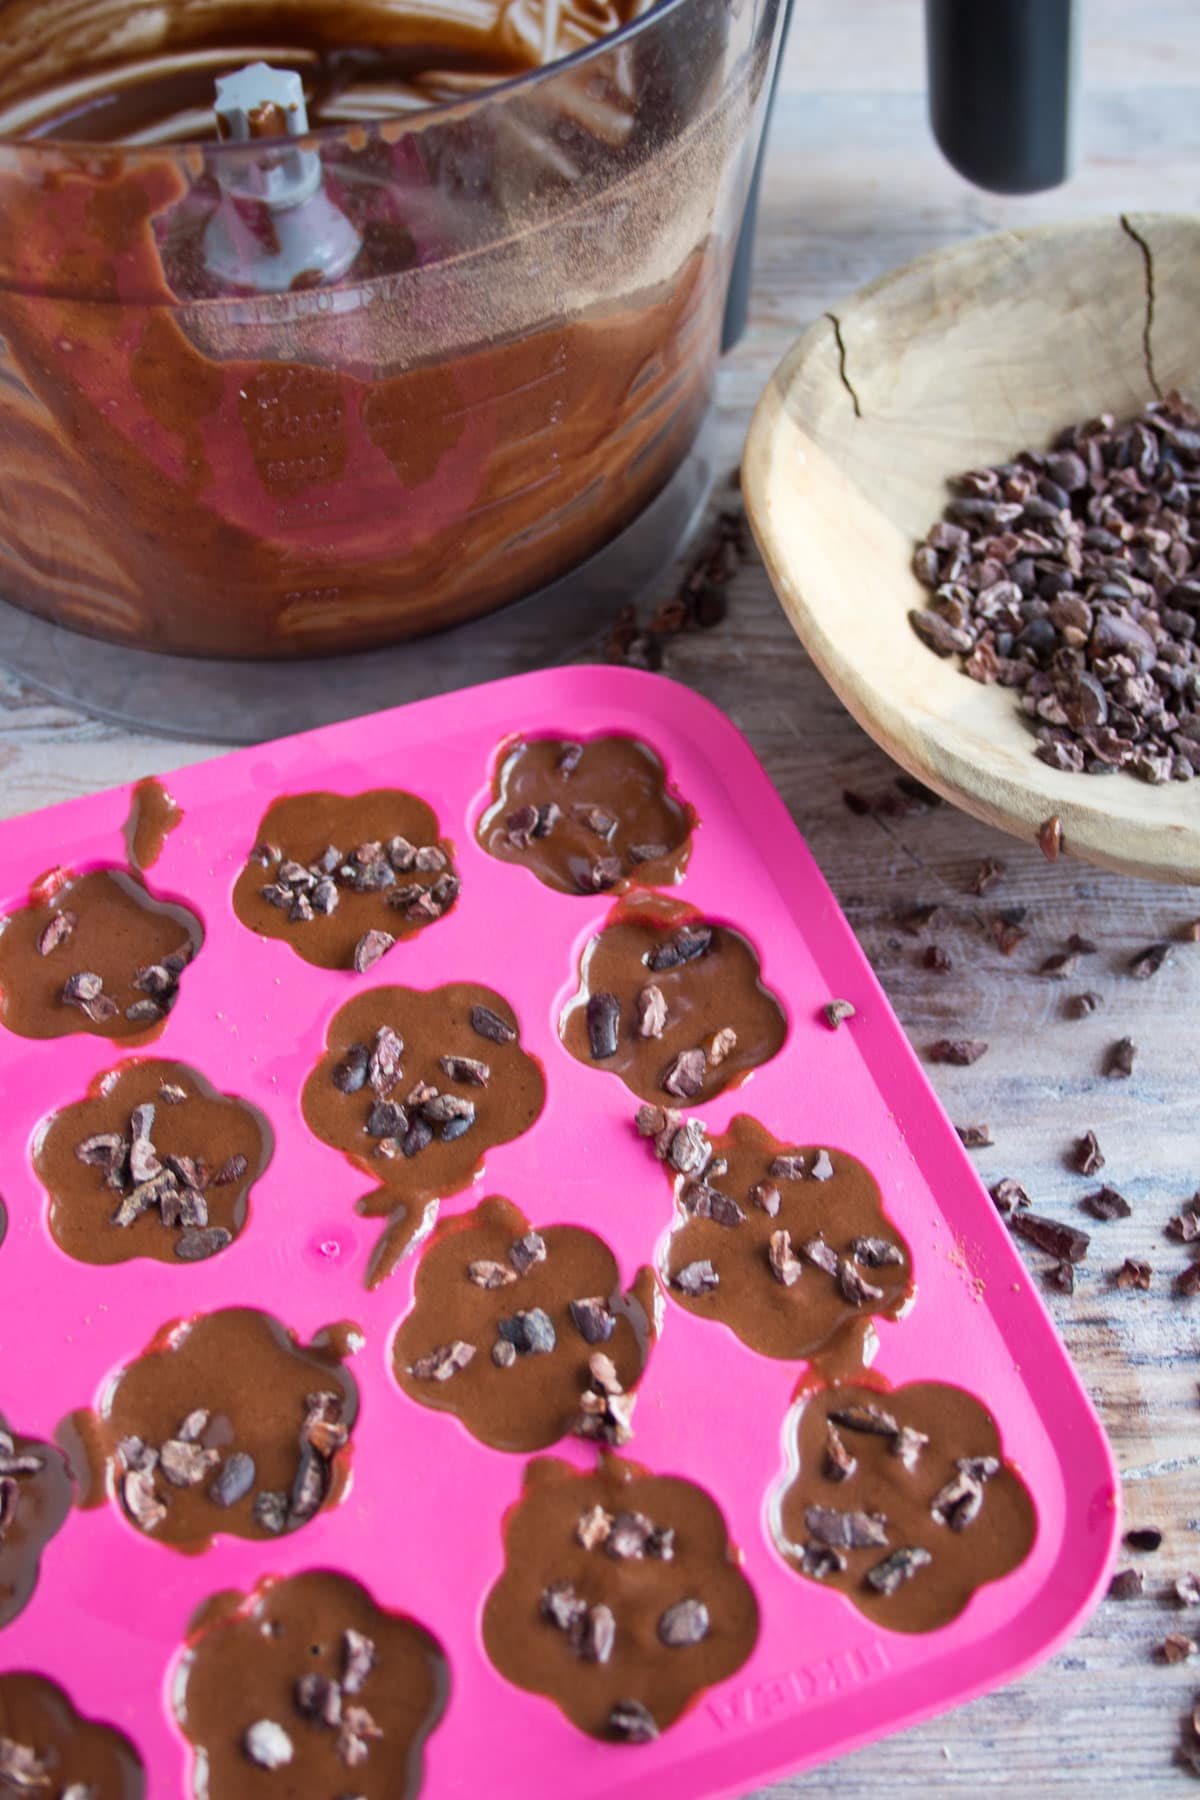 The chocolate mixture in a silicone ice cube tray, topped with cocoa nibs.